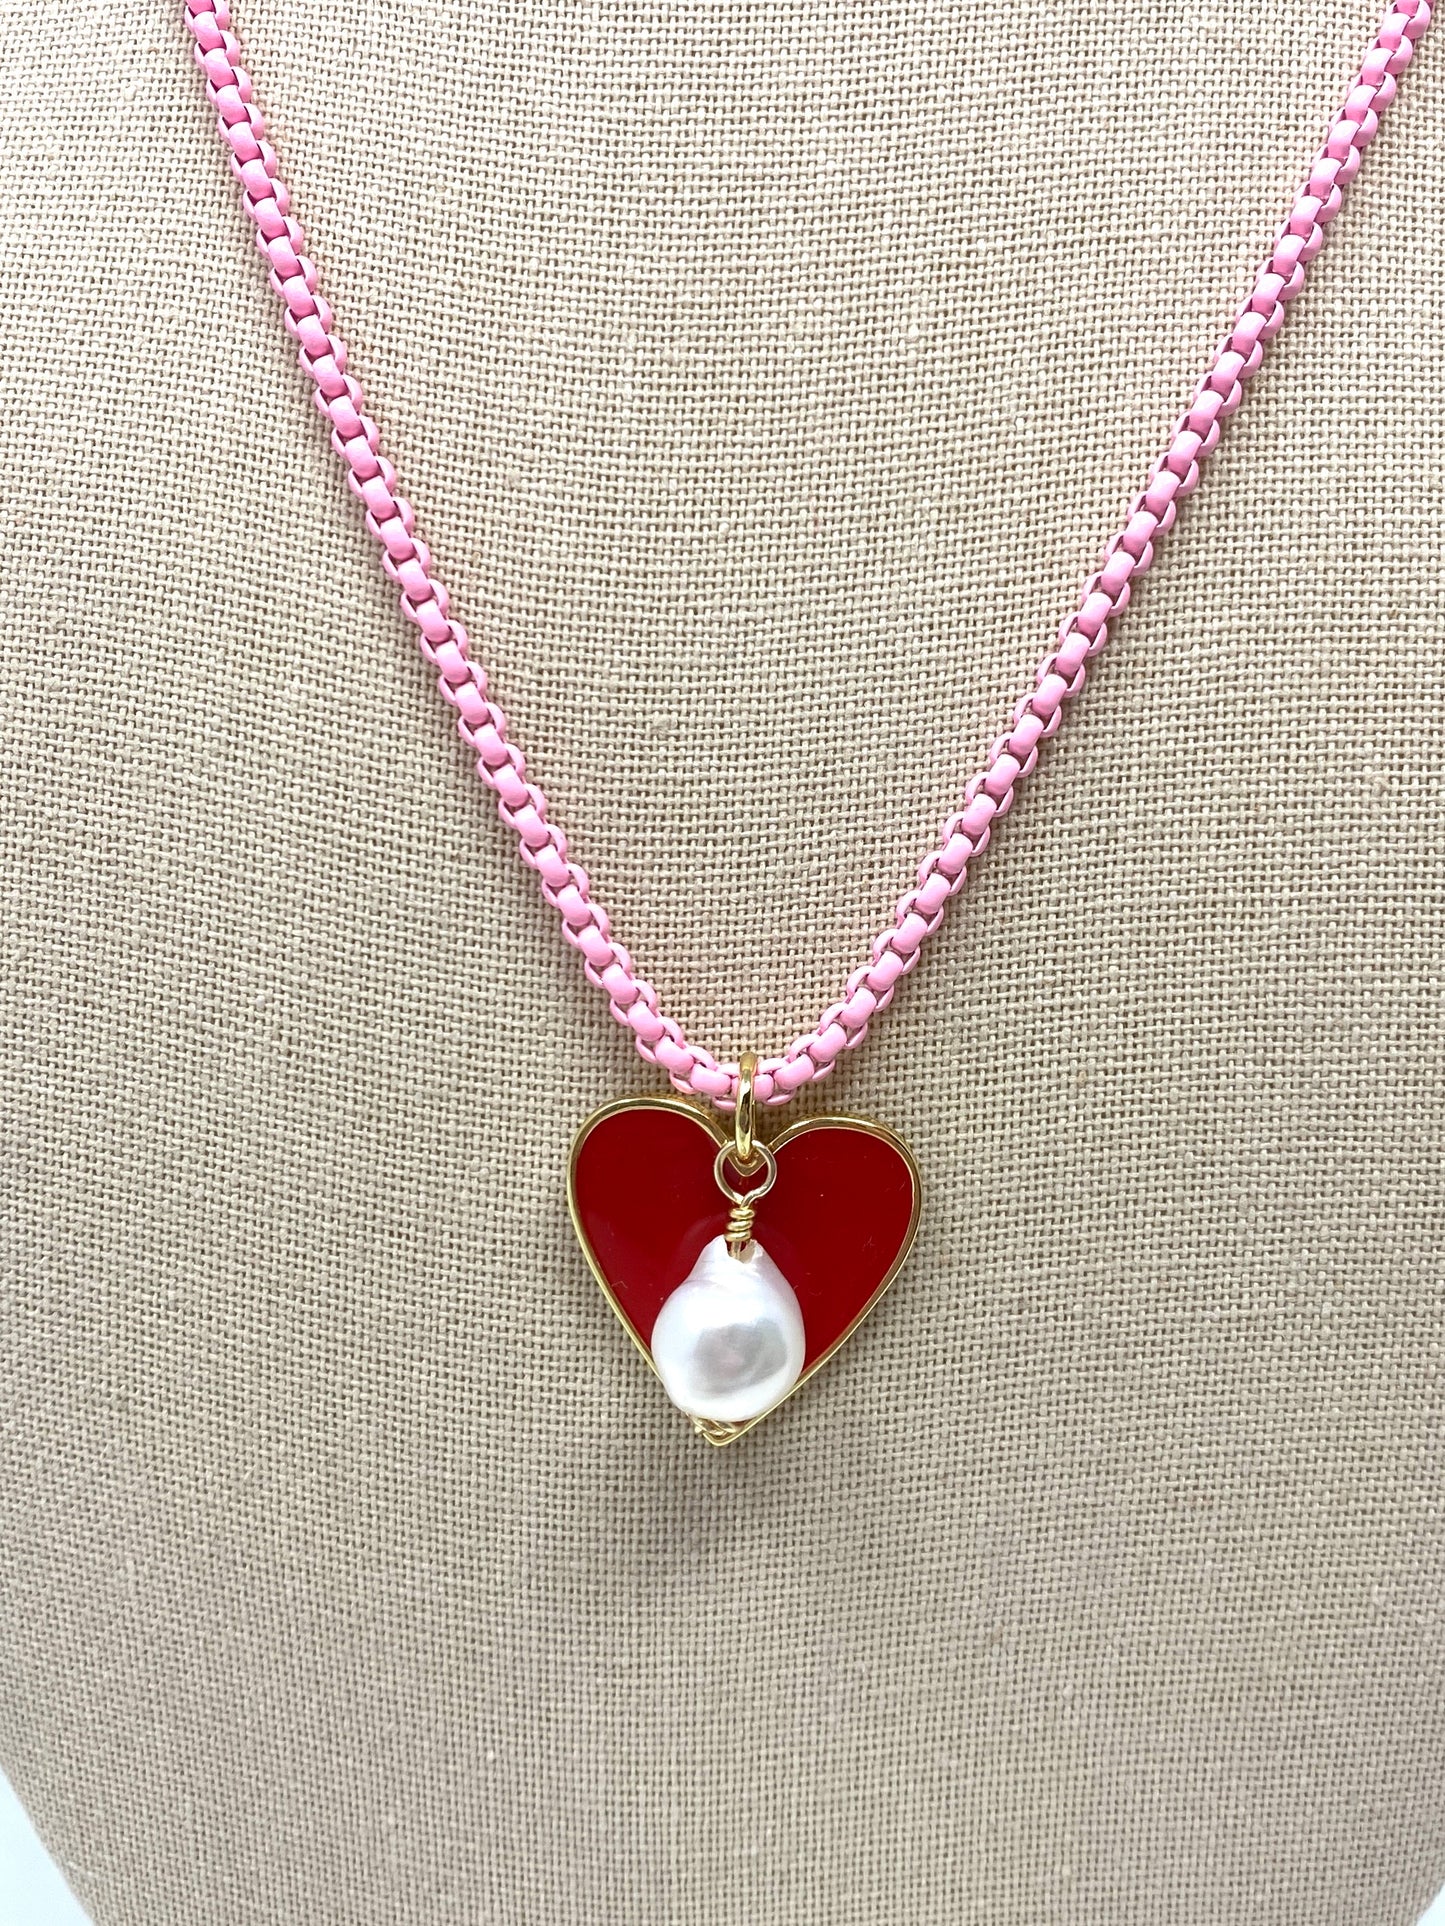 Bubble Gum Pink Enamel Chain With Red Enamel Heart Pendant and Freshwater Pearl Drop